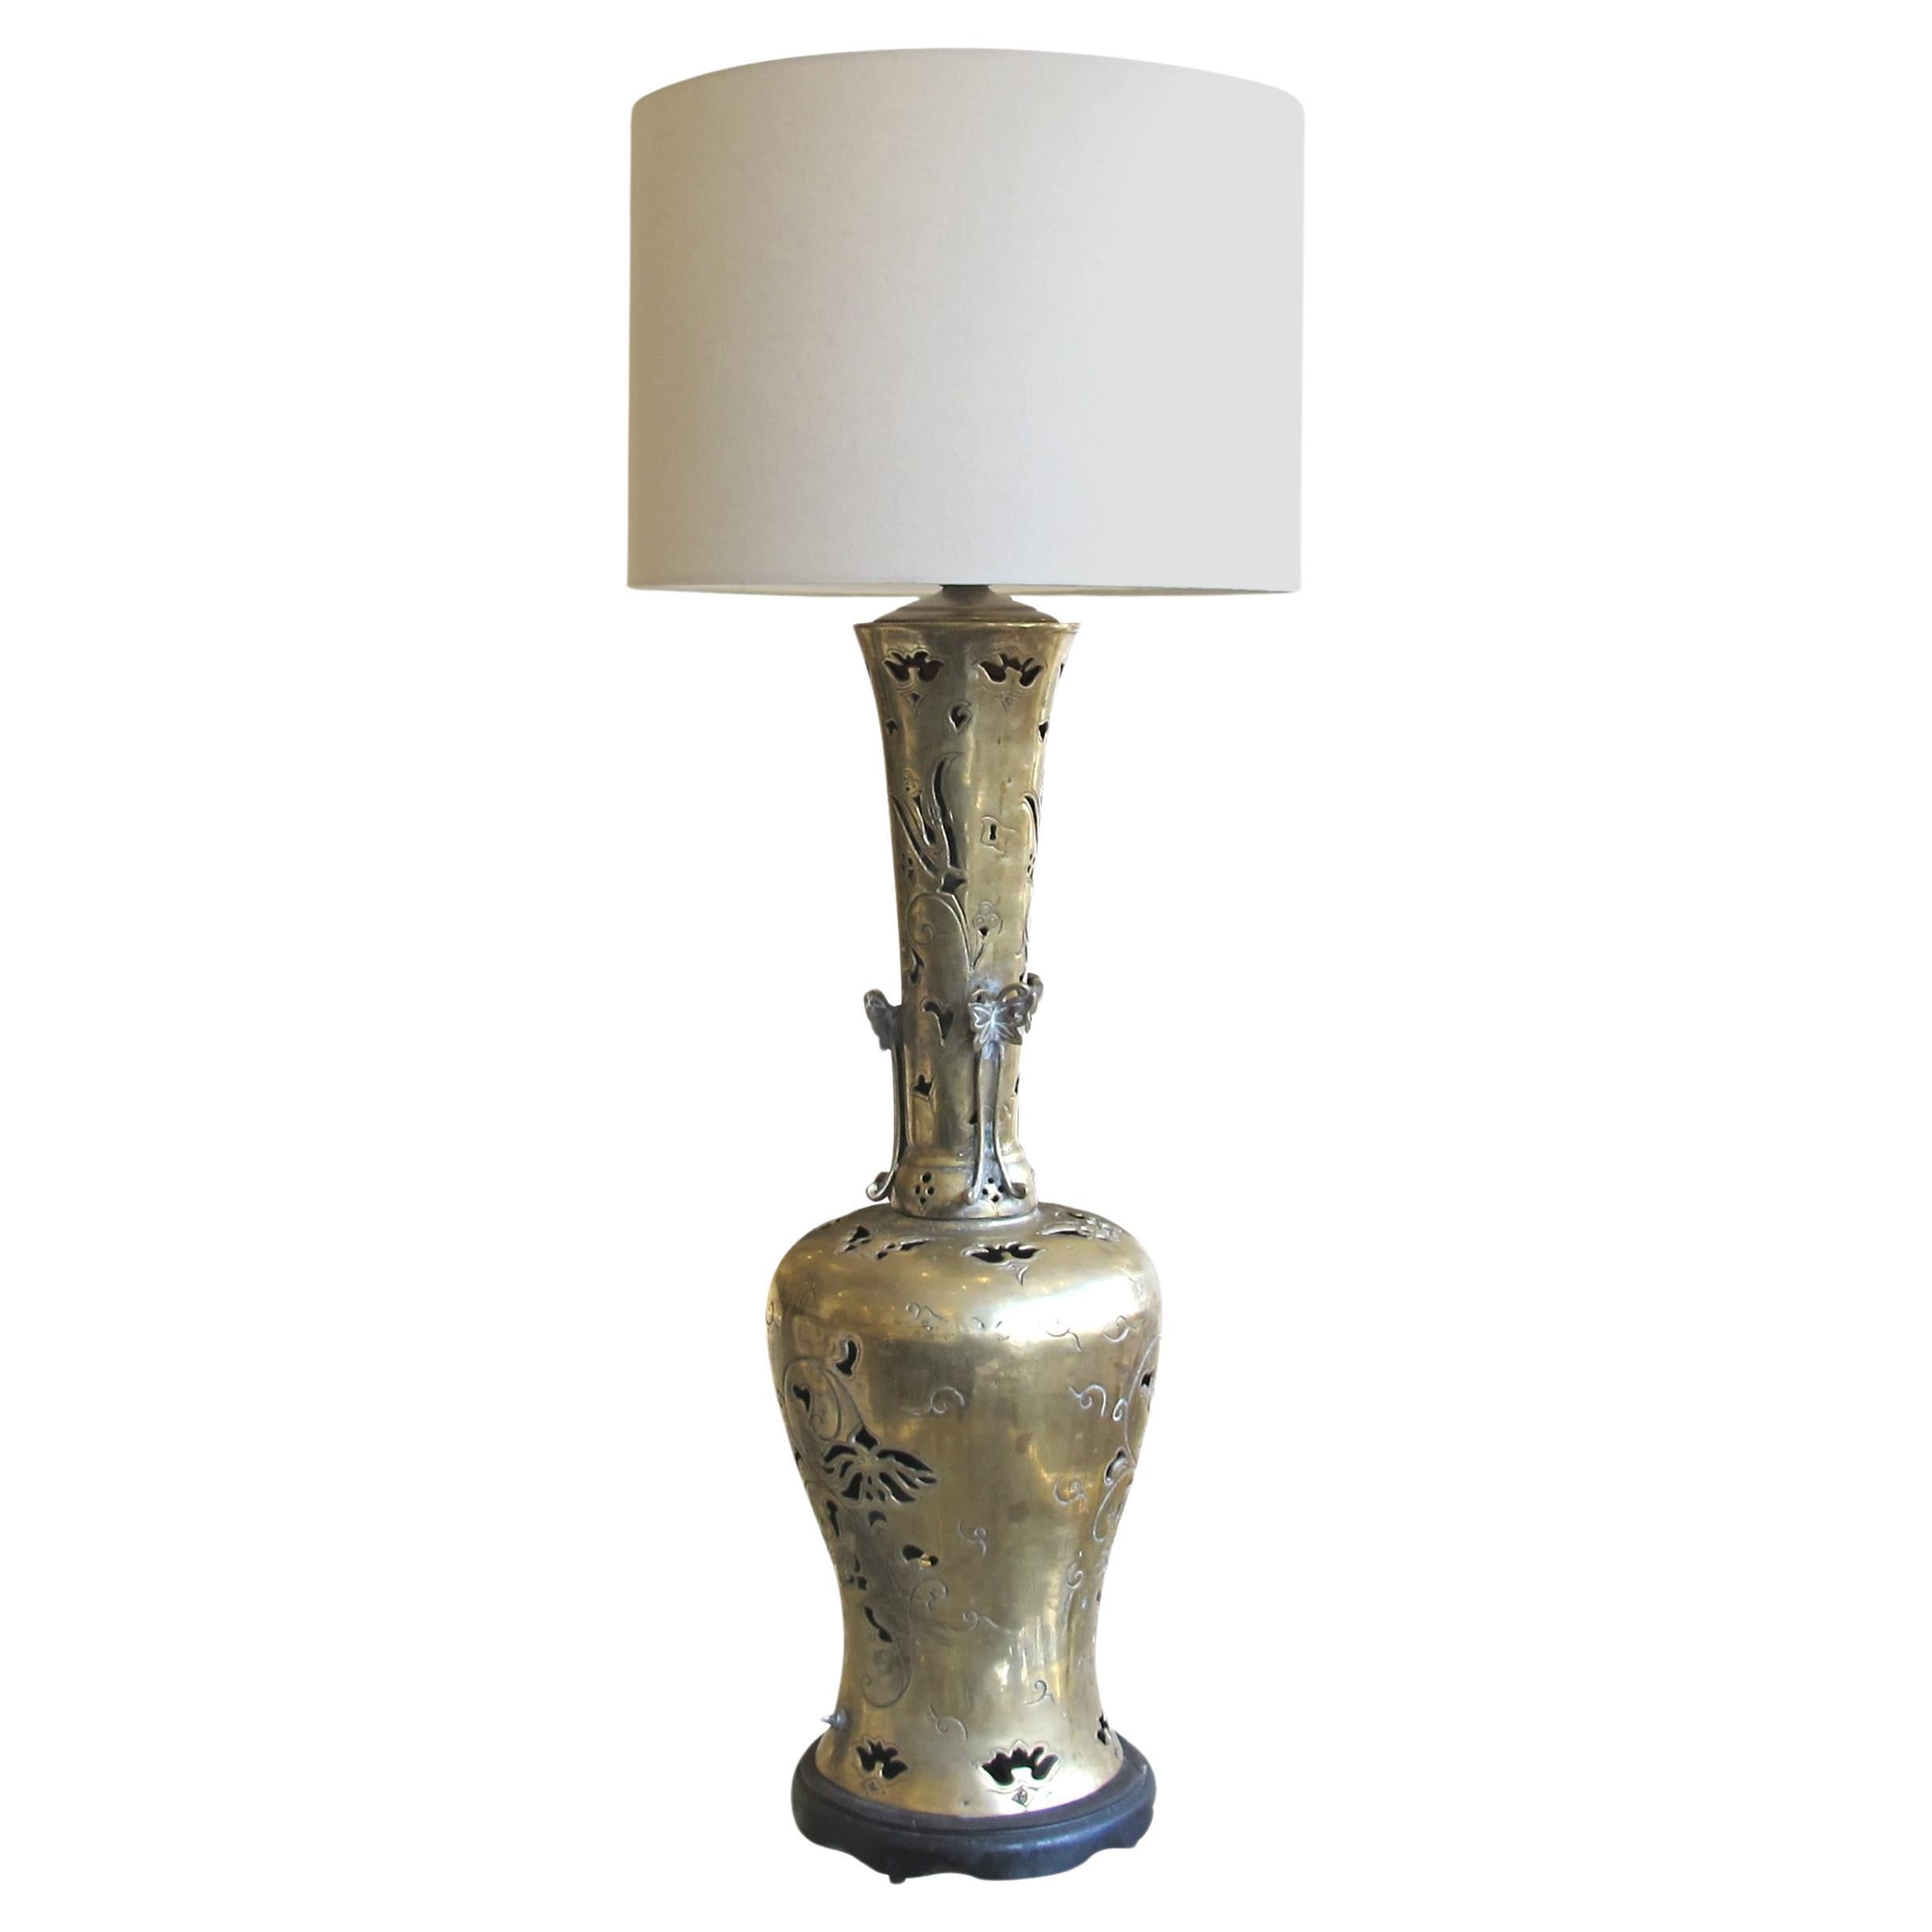 American, Art Deco Large Brass Table Lamp With Organic Carvings For Sale